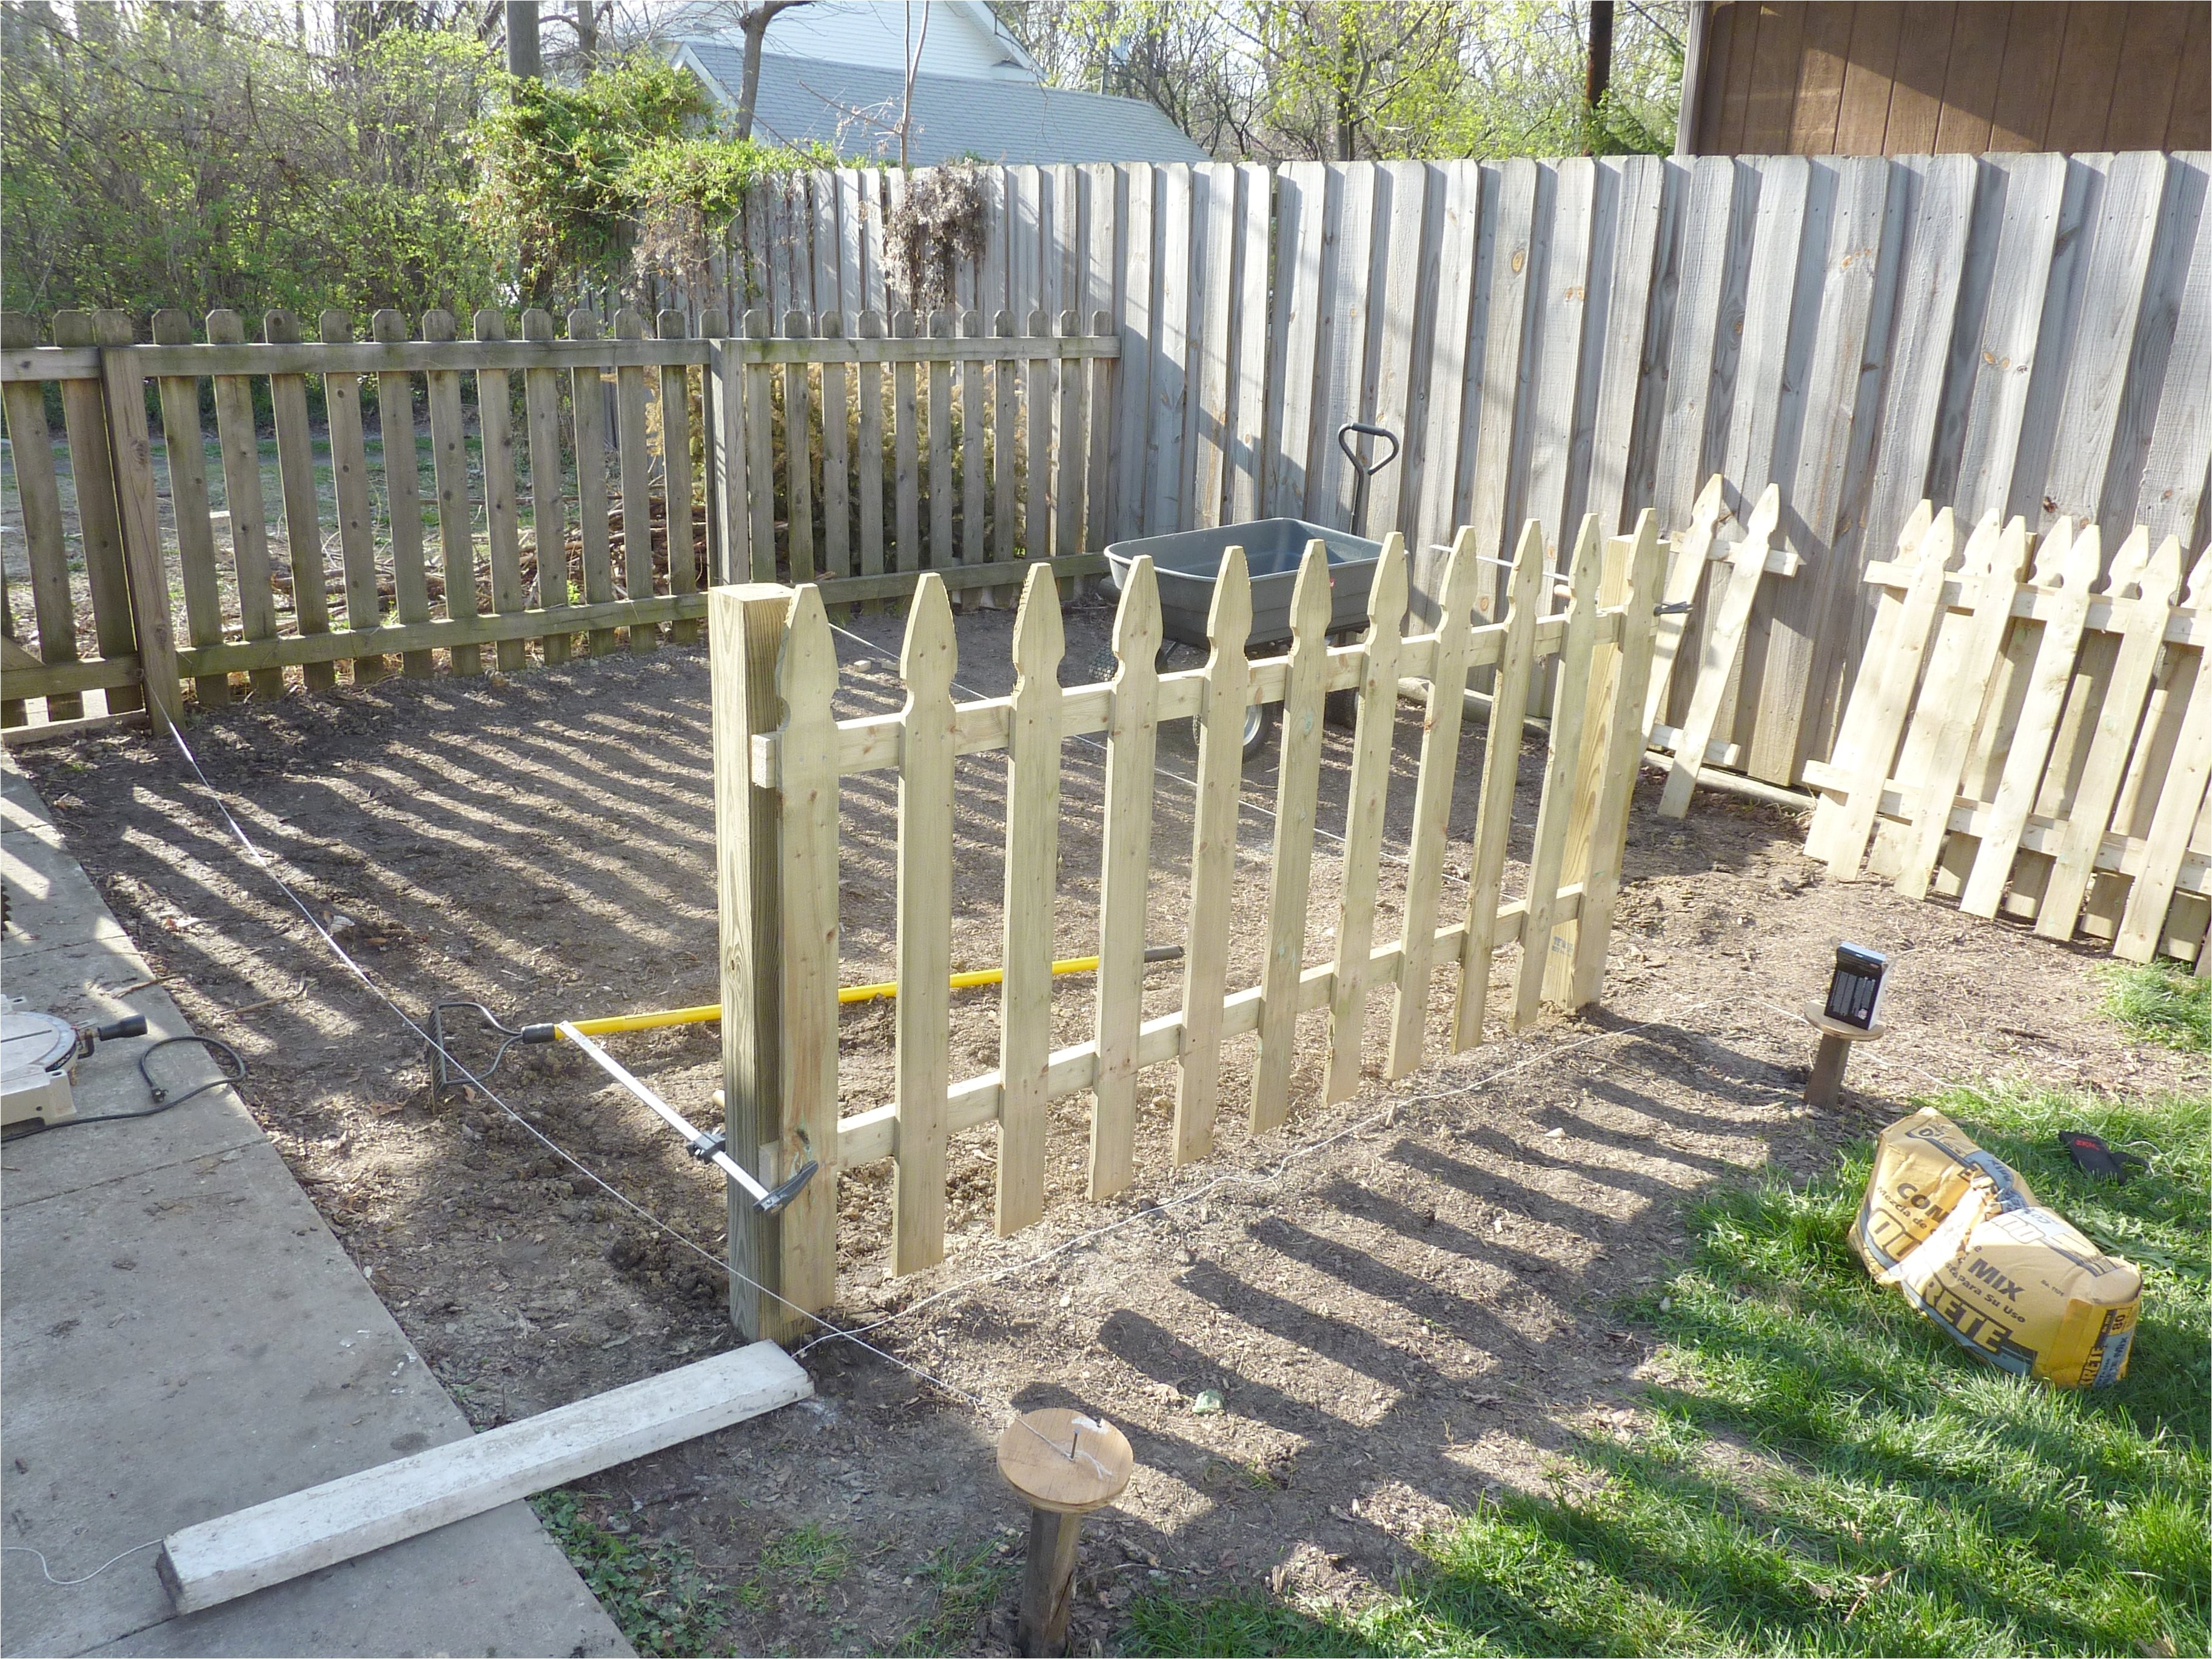 How to Keep Dogs Out Of Garden Charming How to Keep Dog Out Of Garden We Installed A Fence to Keep